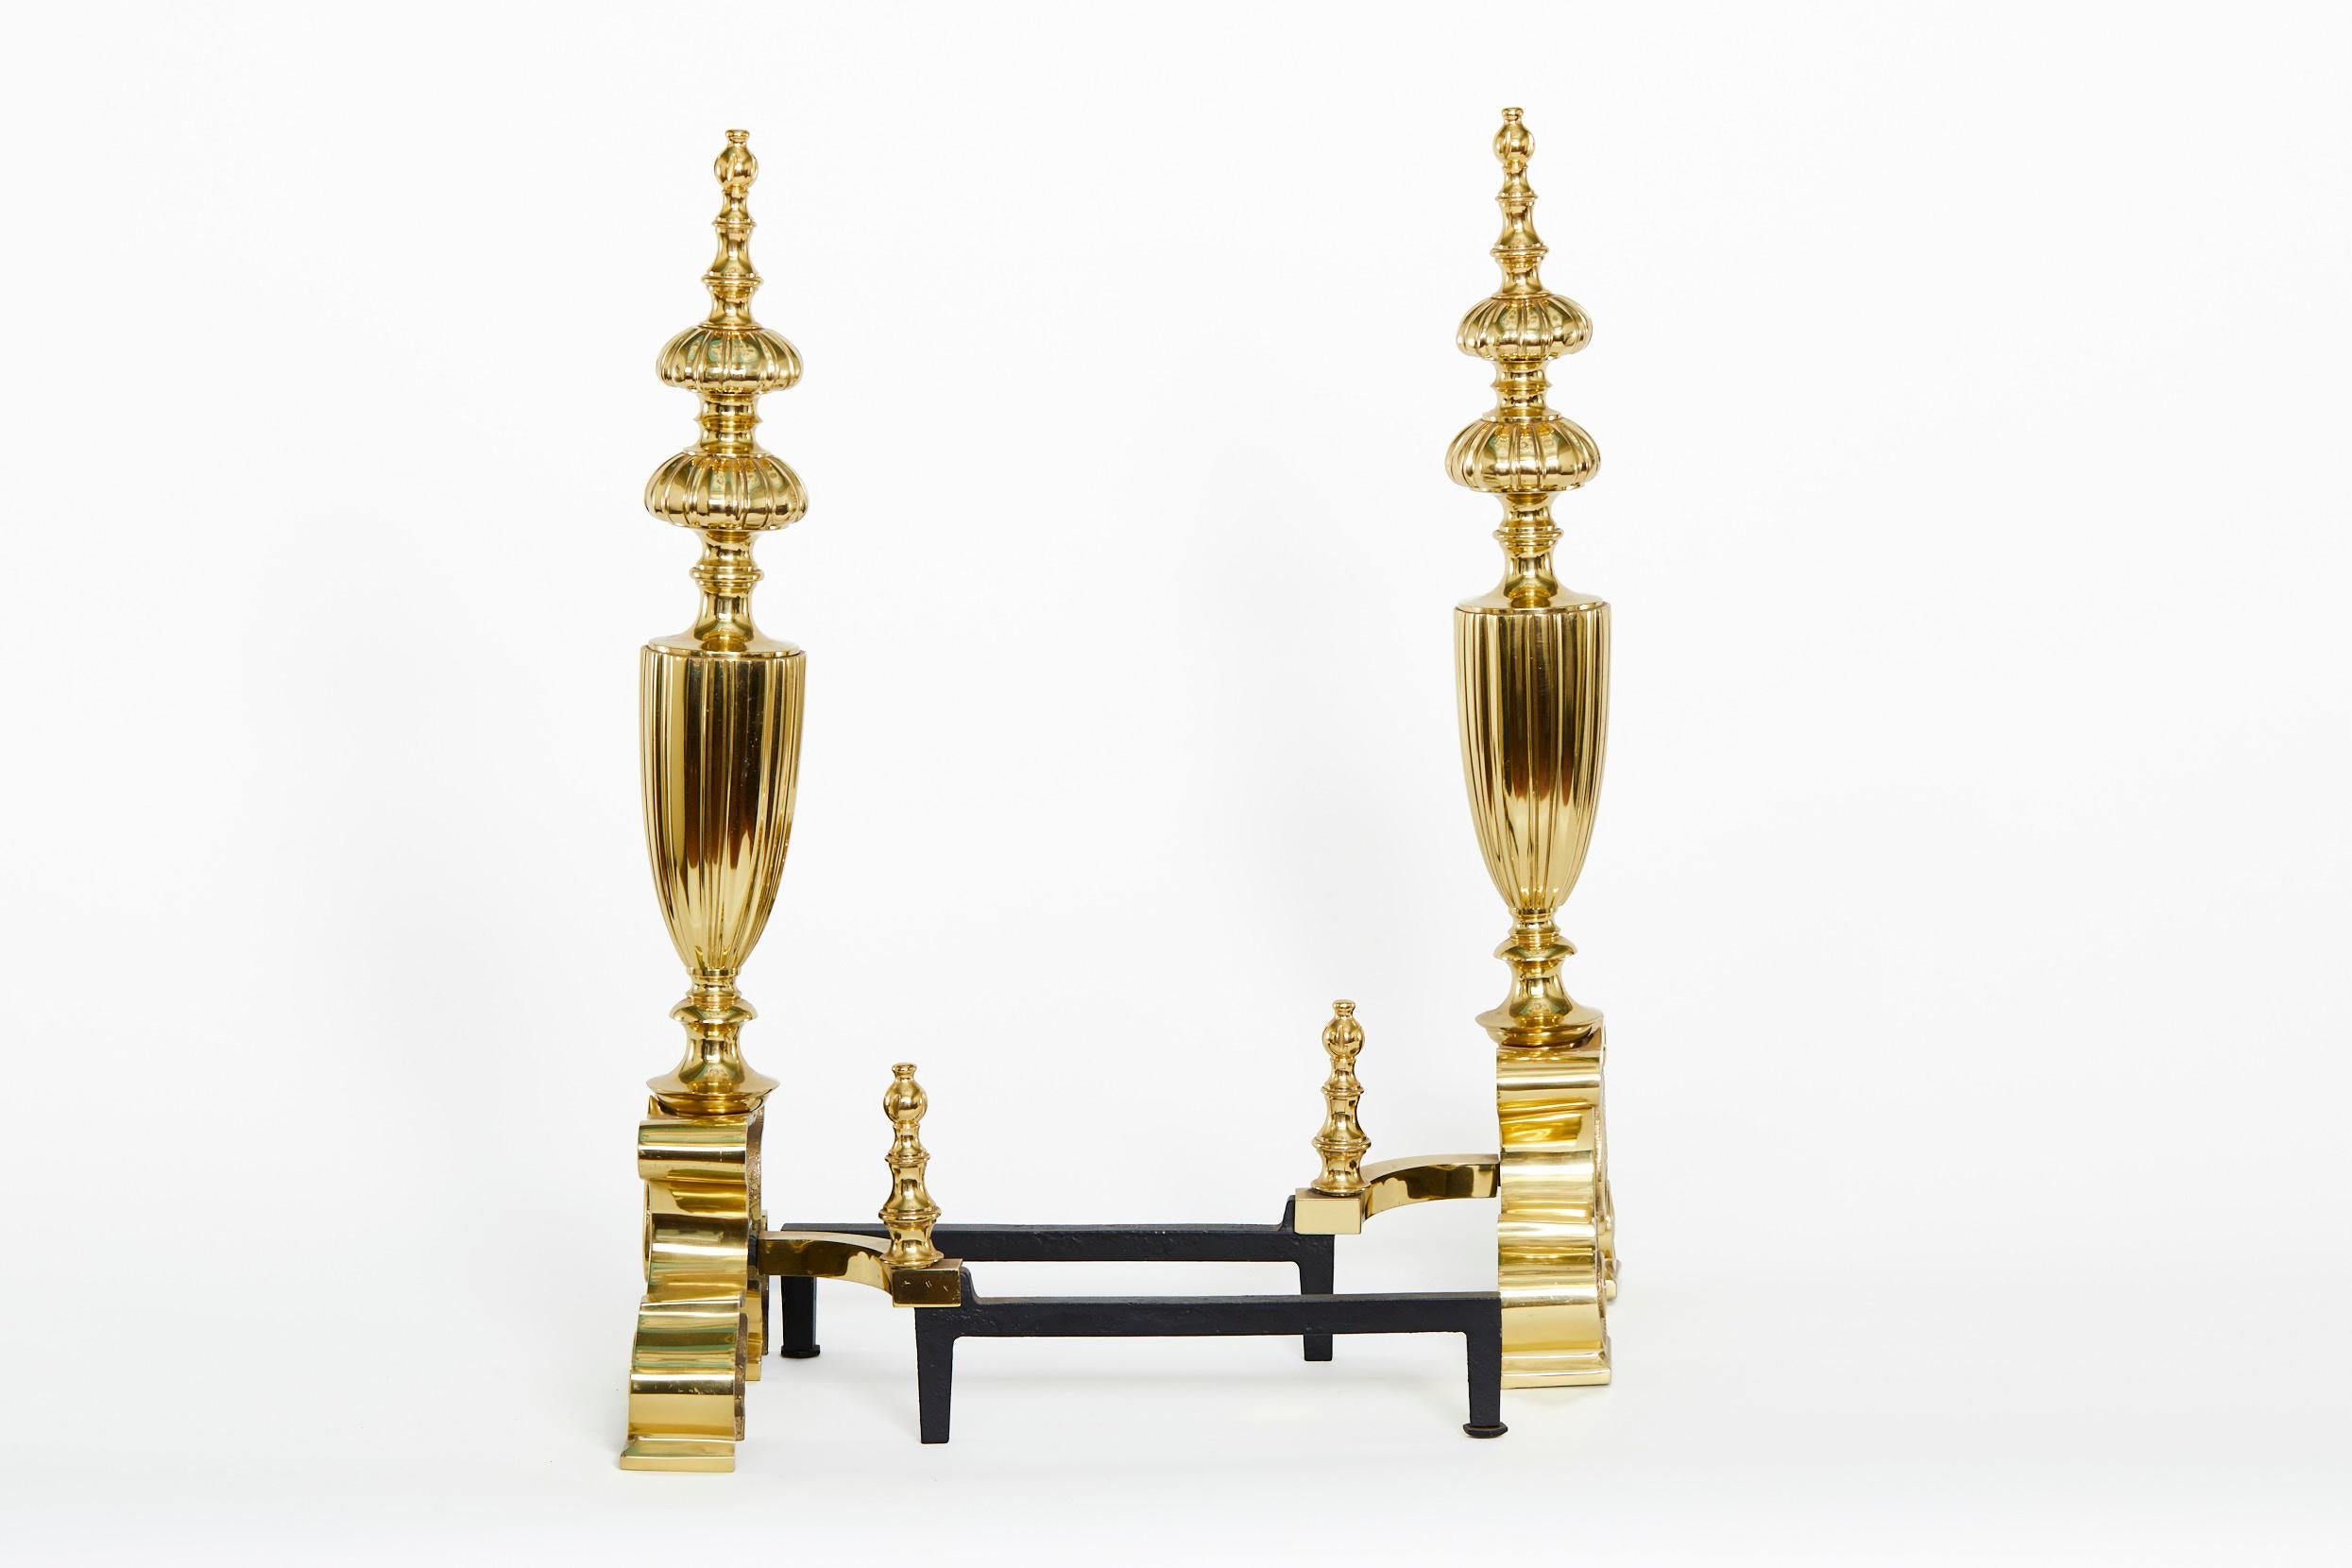 Very large and handsome solid brass Georgian style pair andirons with urn design details top and exterior feet details. Each andiron is in great condition. Minor wear. Each one measures 28 inches high X 12 inches wide X 19 inches deep.